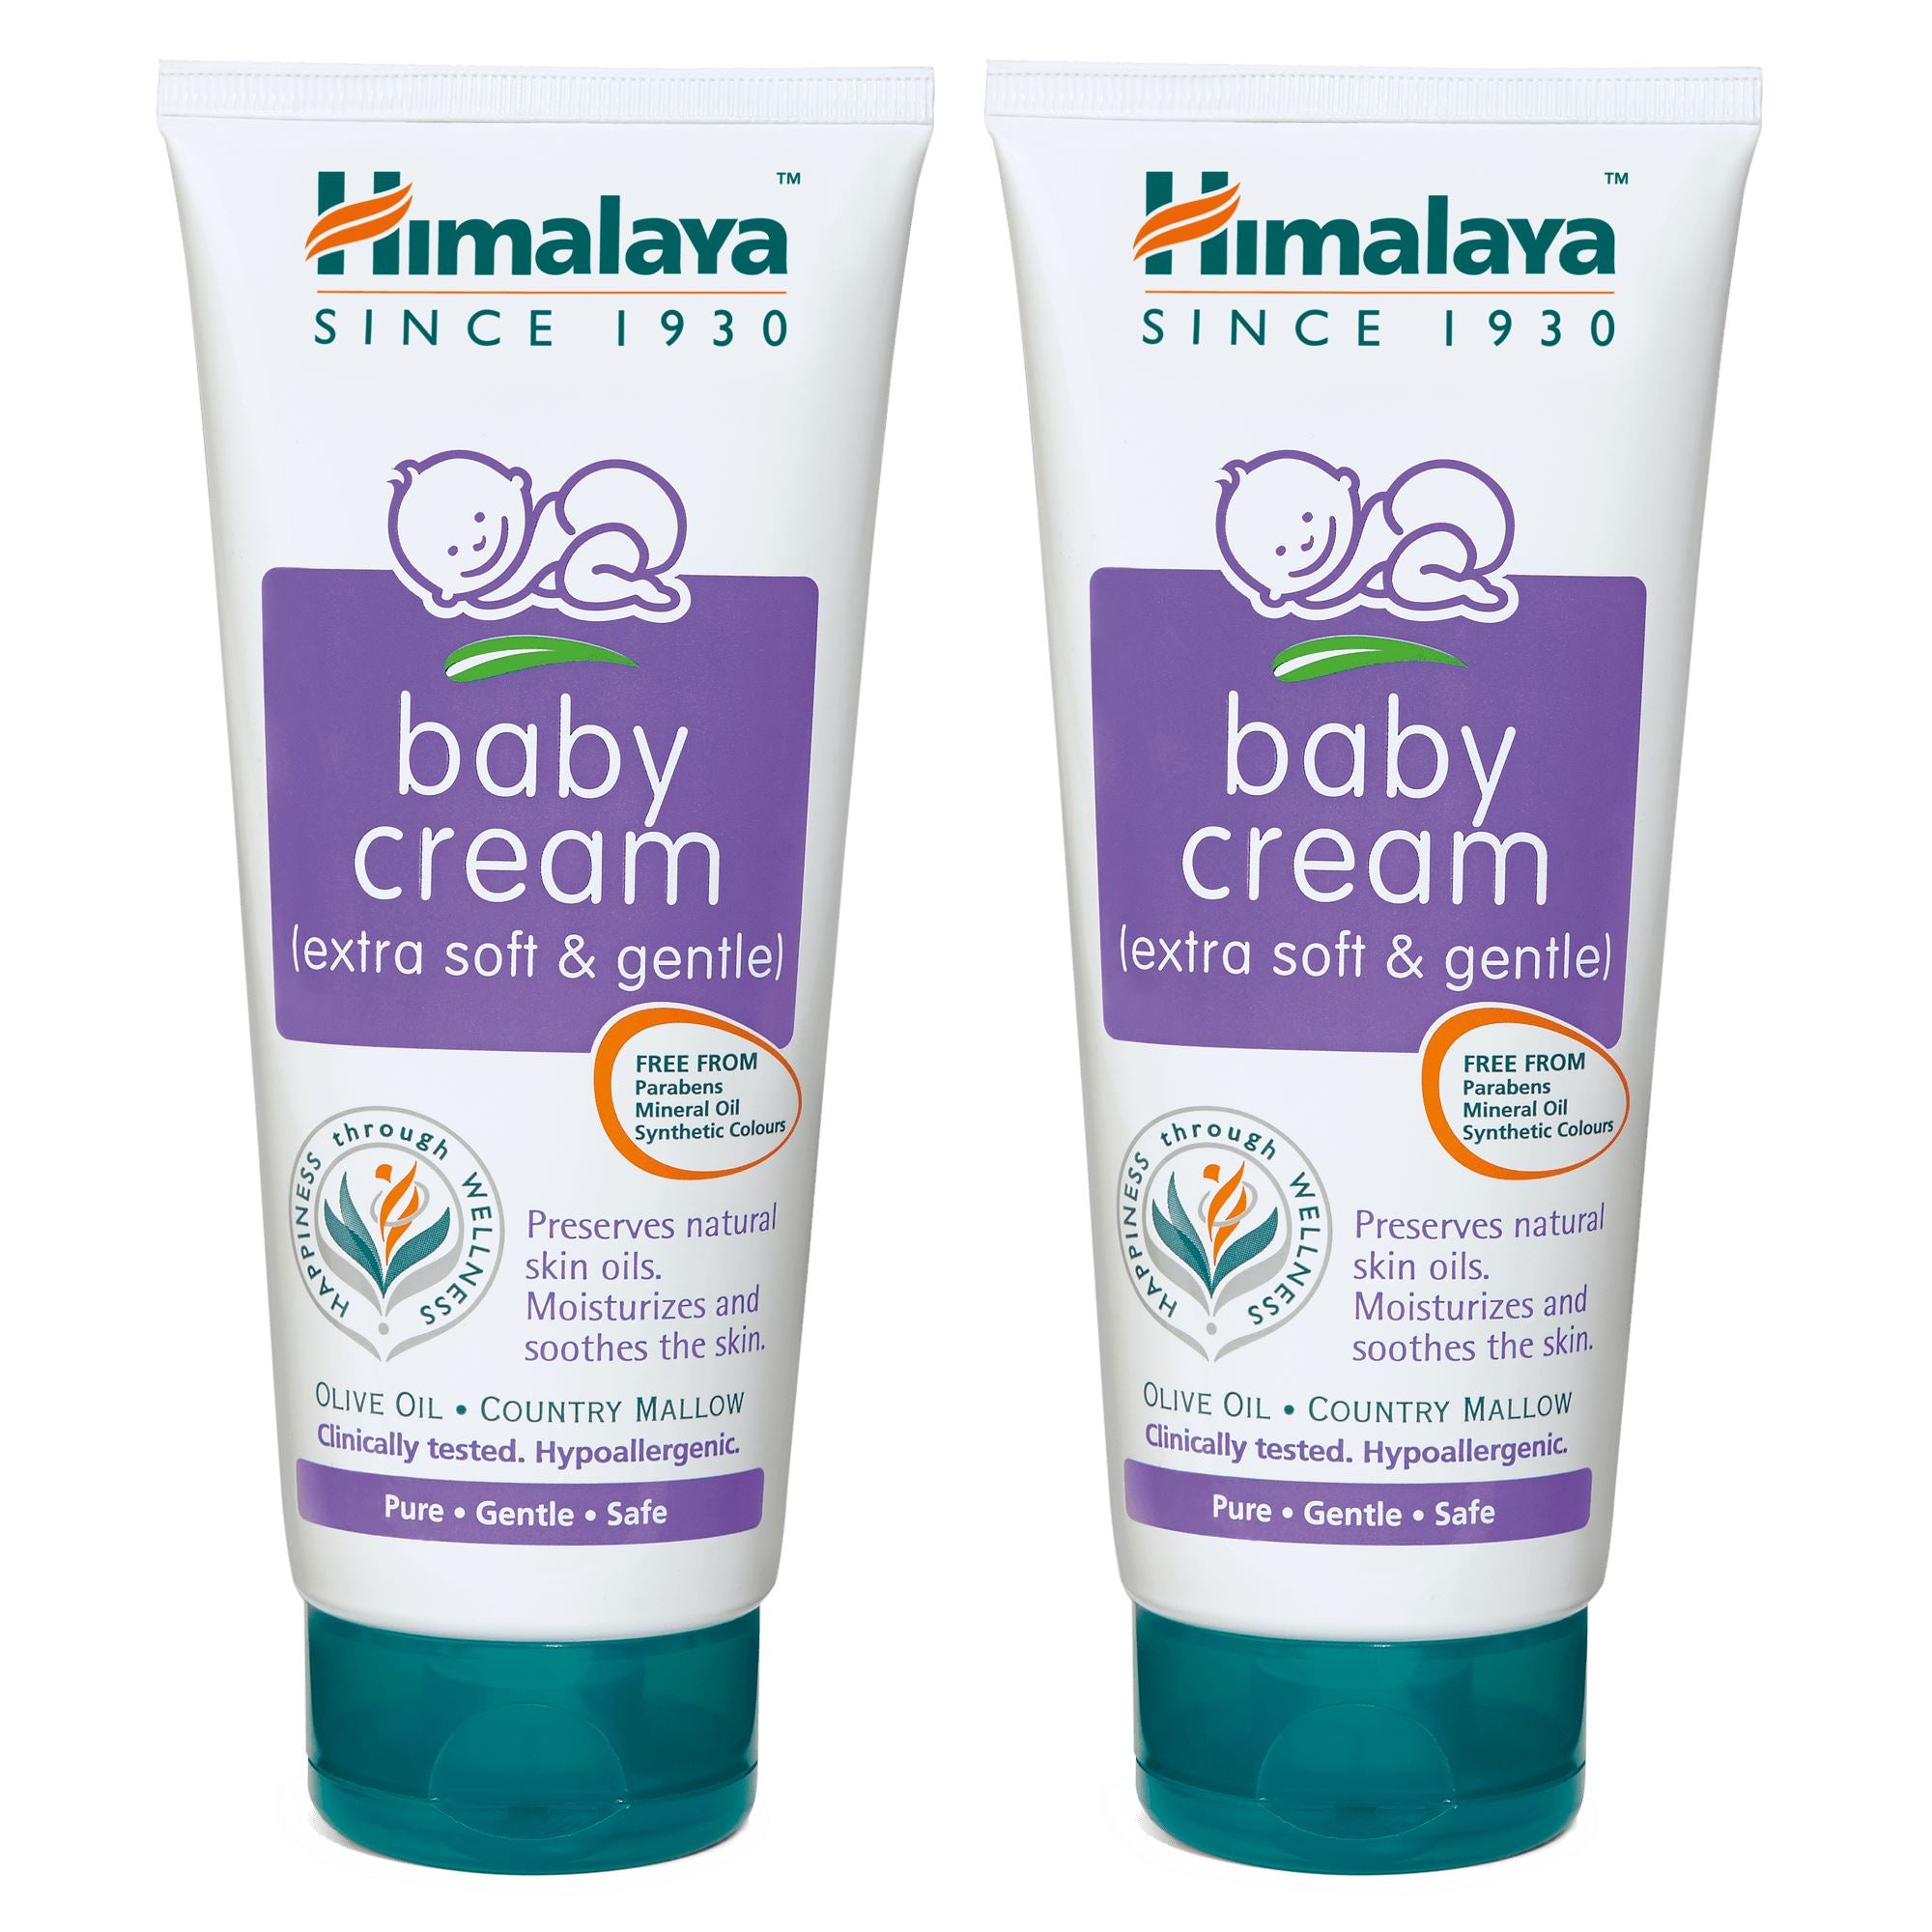 Himalaya Baby cream - Preserves softness and soothes baby’s skin